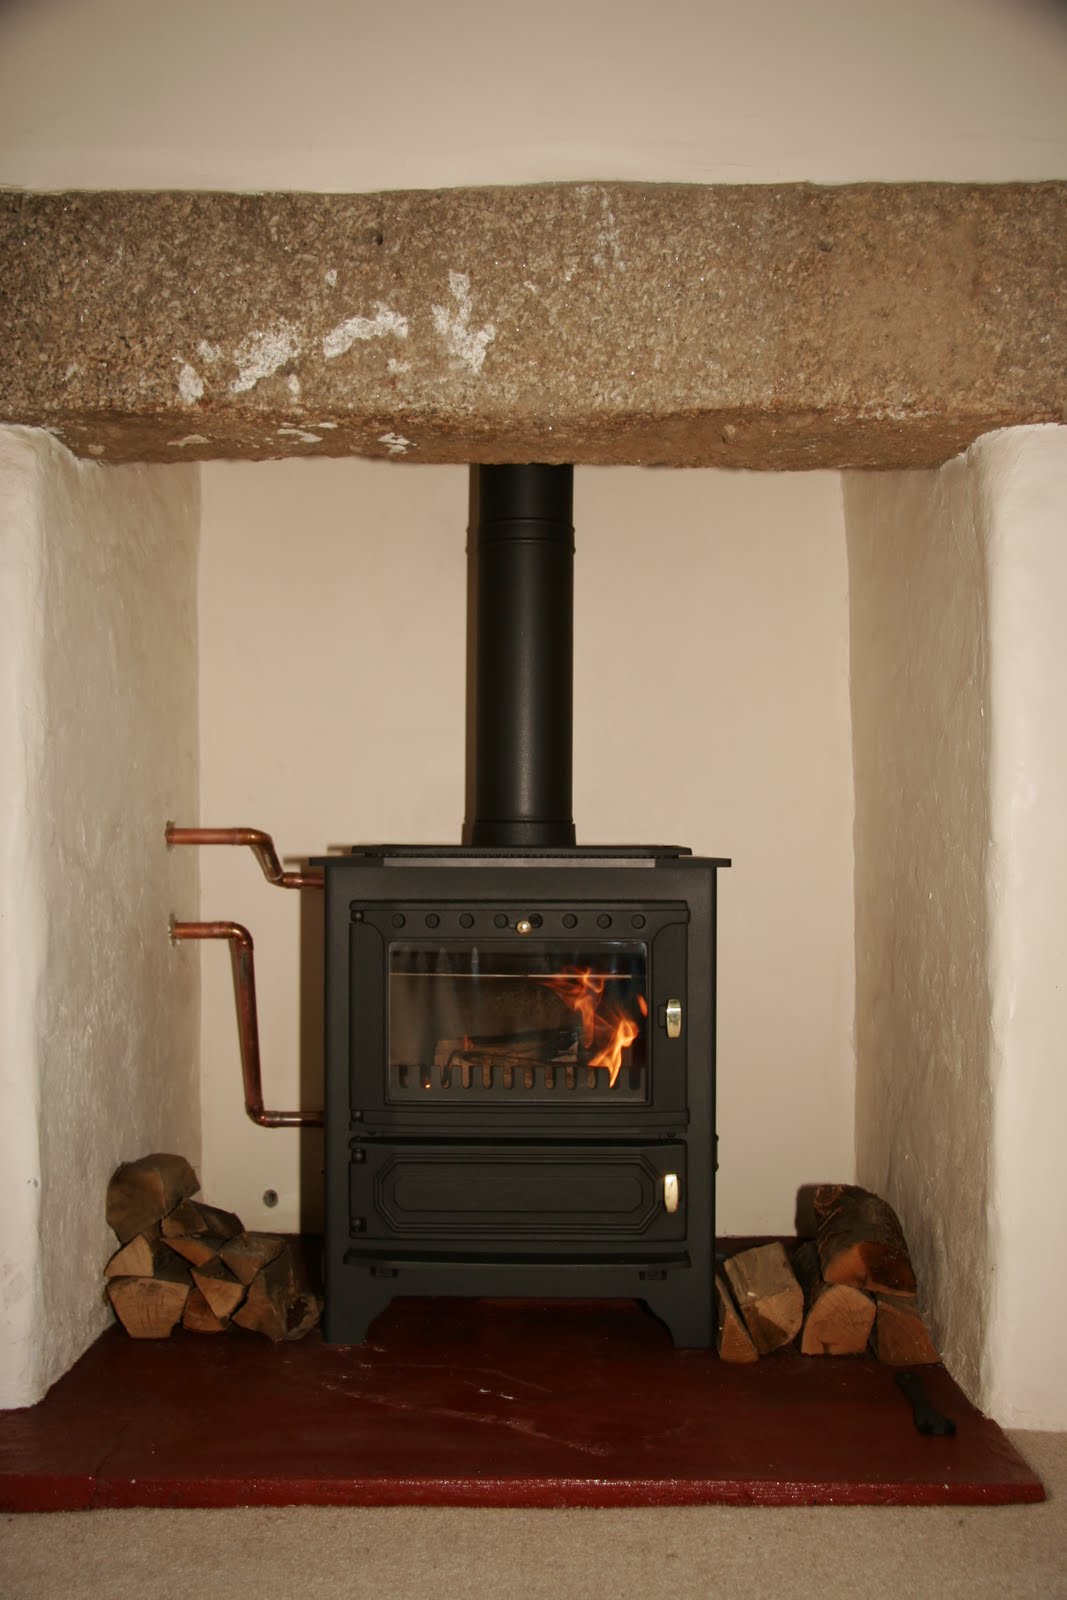 LPG gas stove installed by Redwood Stoves the model is a Harmony green ...